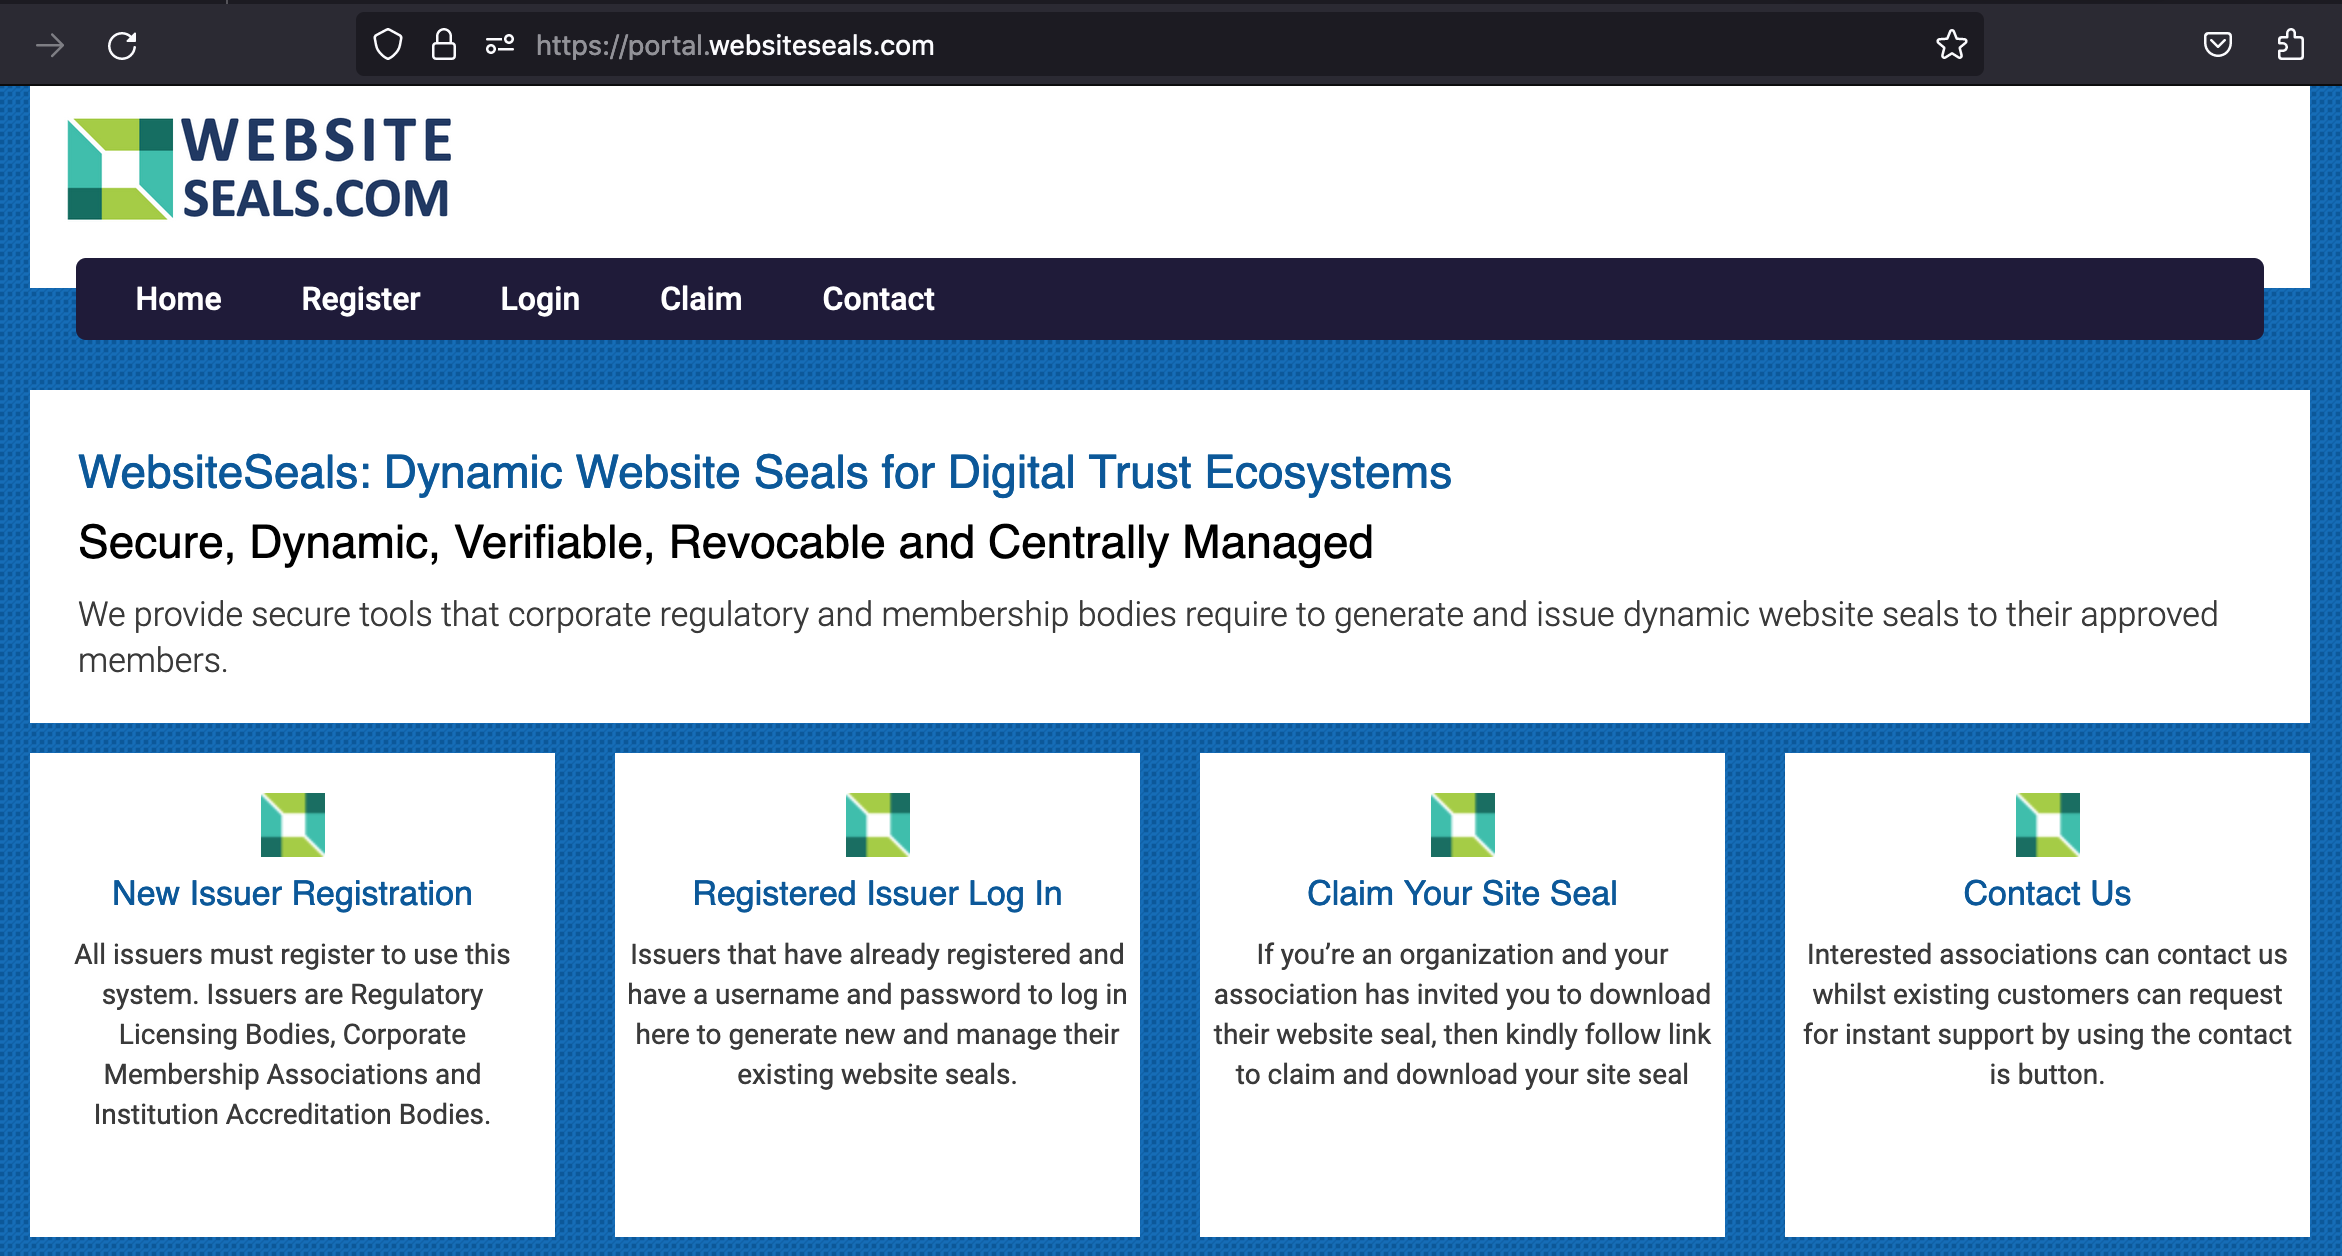 Portal home page which gives access to associations and members to interact with the system